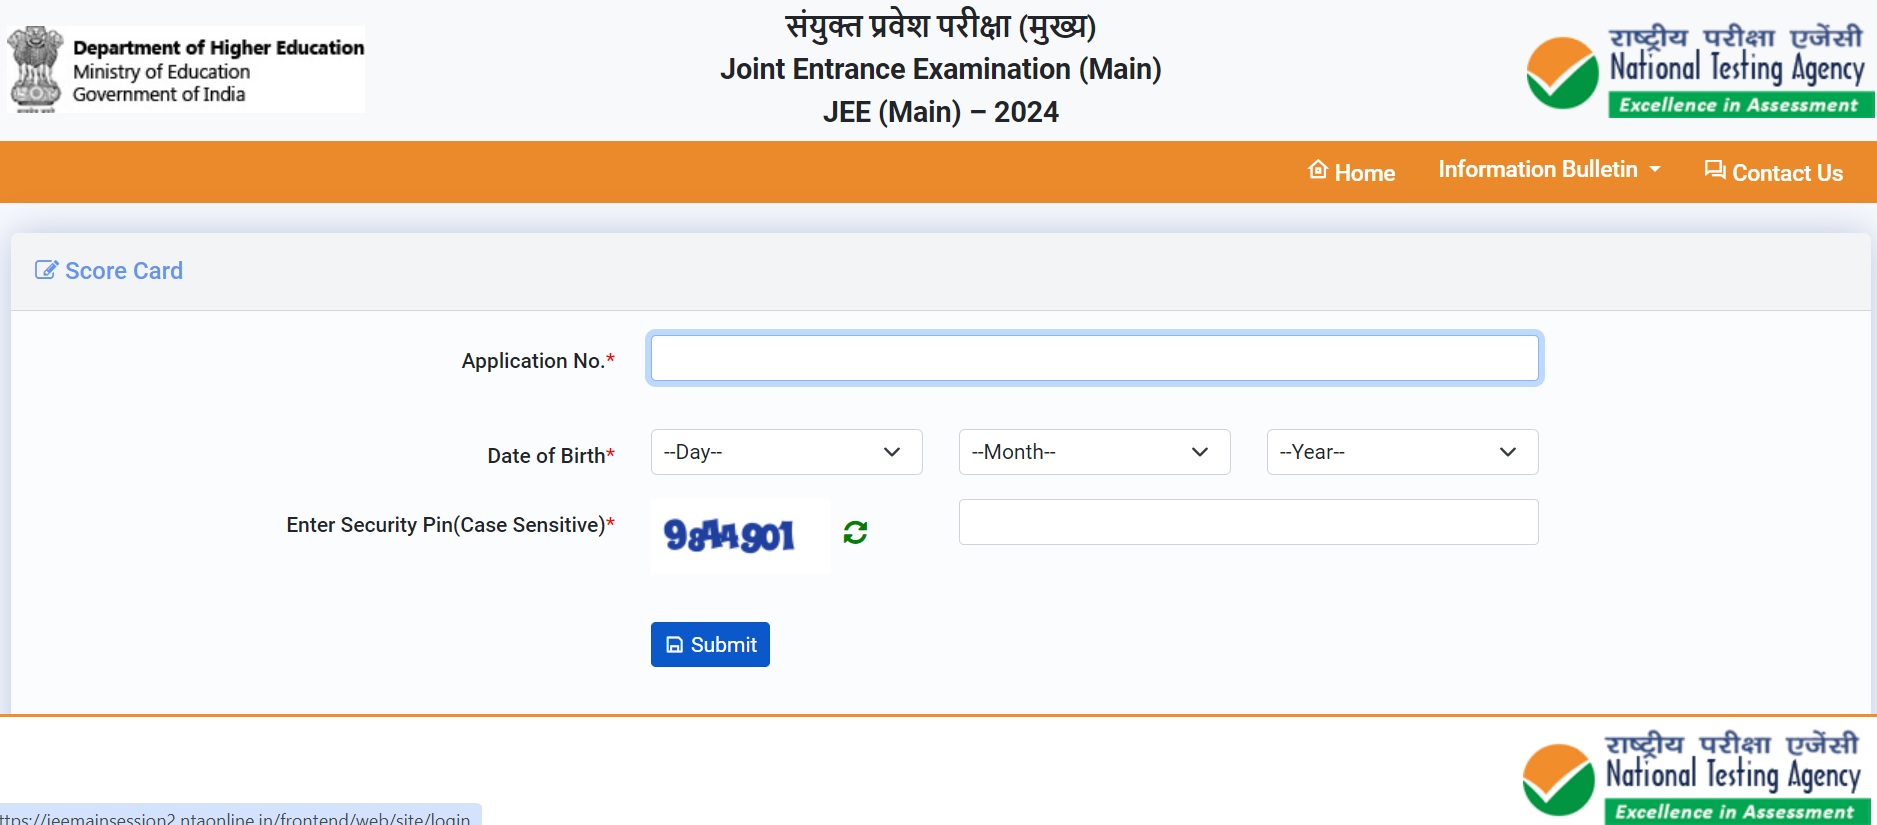 JEE-main-2024-result-window-session-2